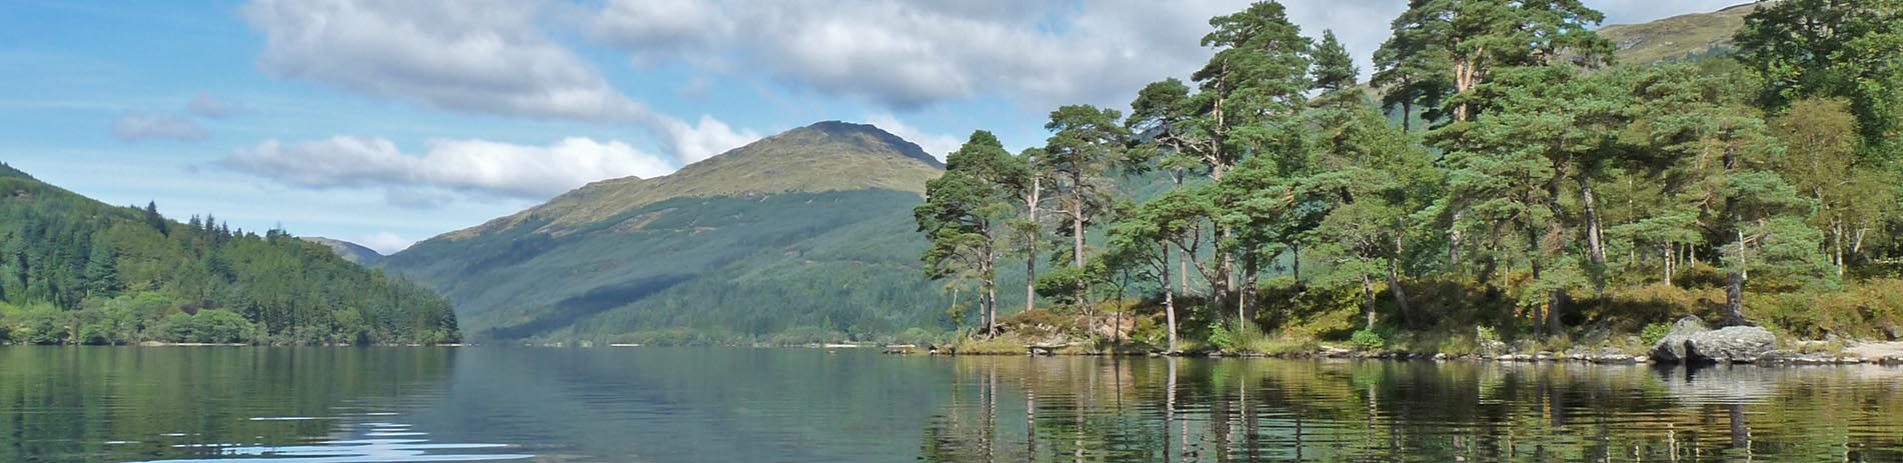 loch-eck-surrounded-by-forests-with-high-hill-in-the-background